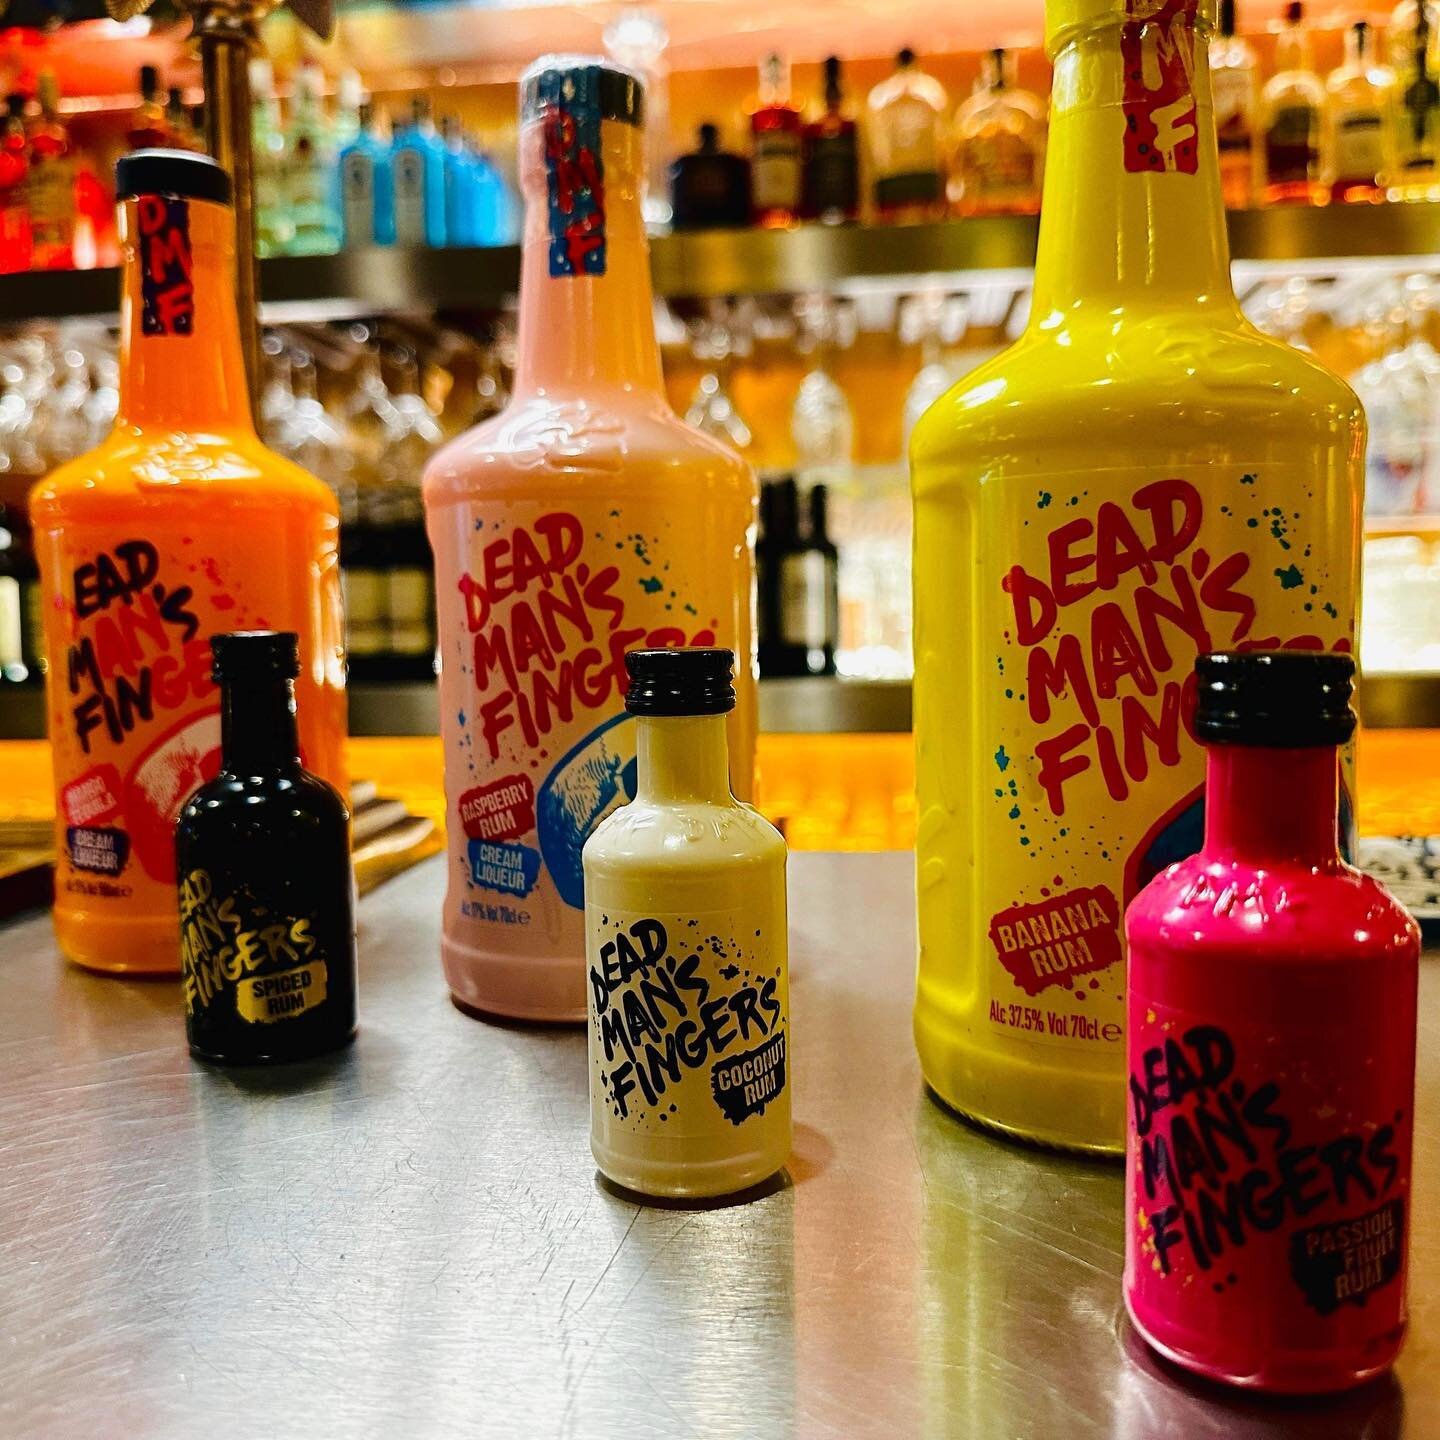 The clocks go forward tonight, the days are getting longer, and it&rsquo;s time to brighten up your weekend drinks ☀️🍹

Get some @deadmansfingers in you this weekend!!💀 We&rsquo;ve got loads of flavours including, banana, raspberry, mango, passion 